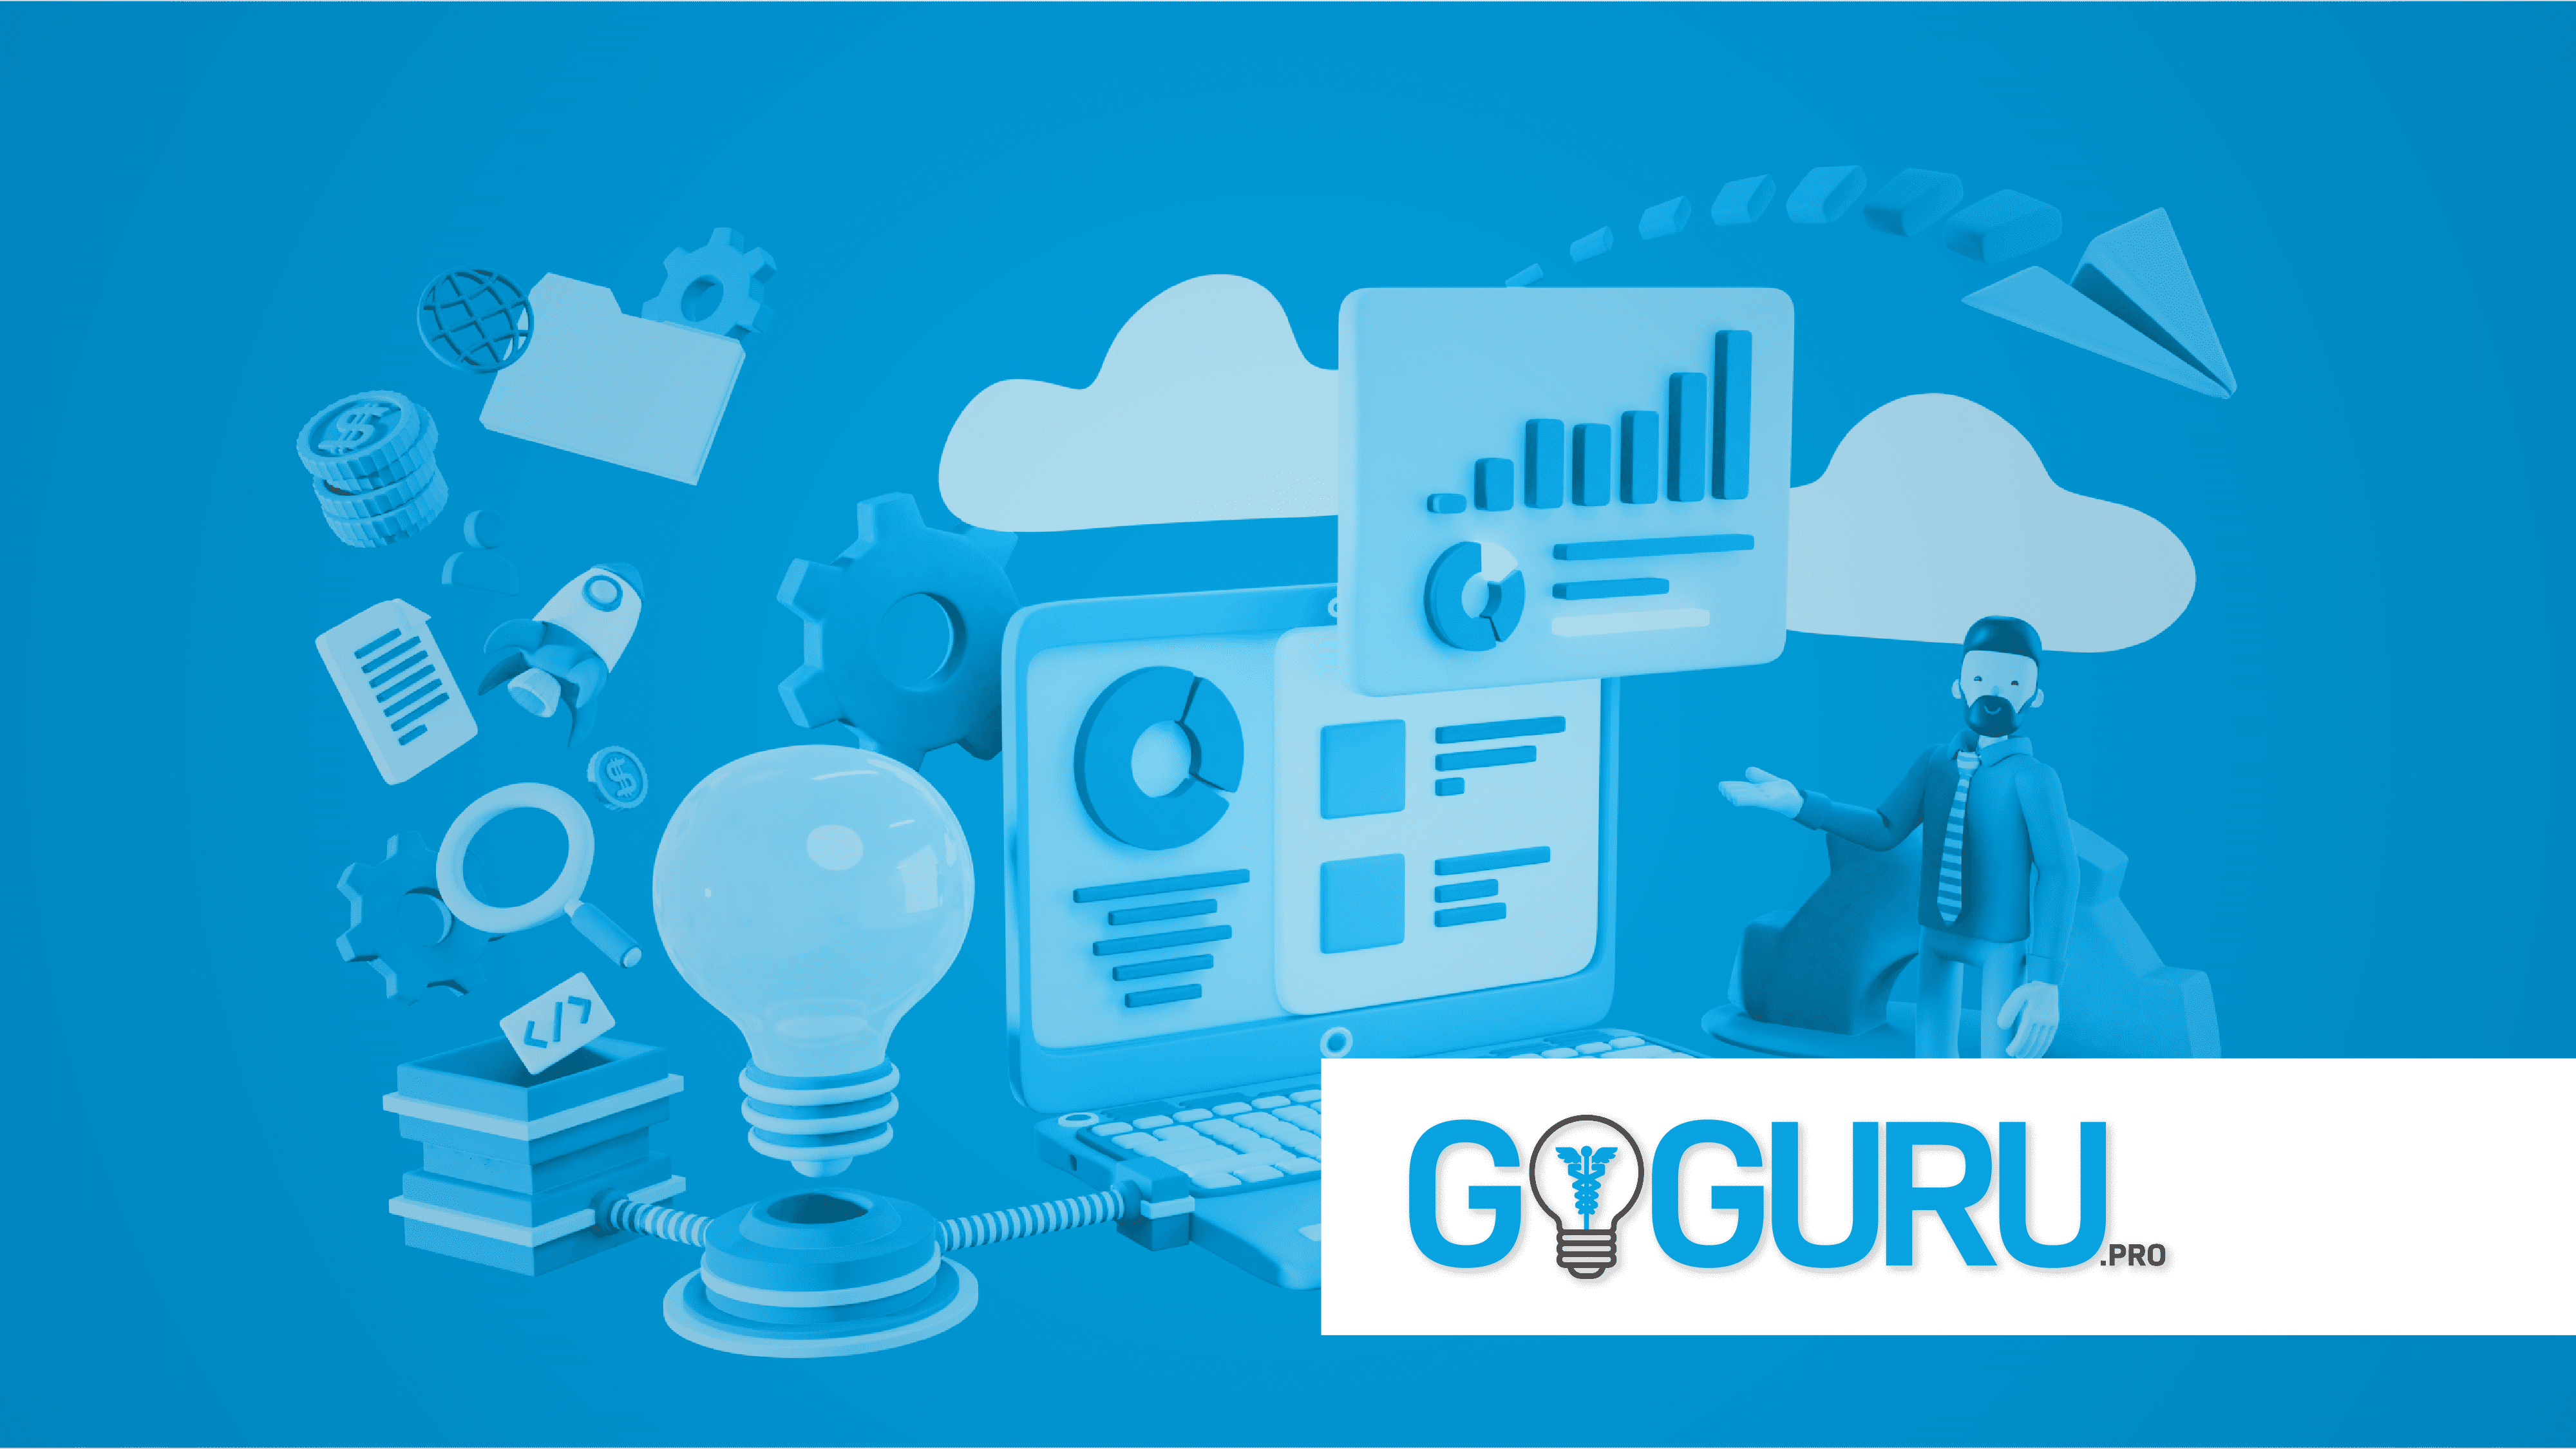 7 Reasons Why GoGuru Pro is the Ultimate CRM for Medicare Agents